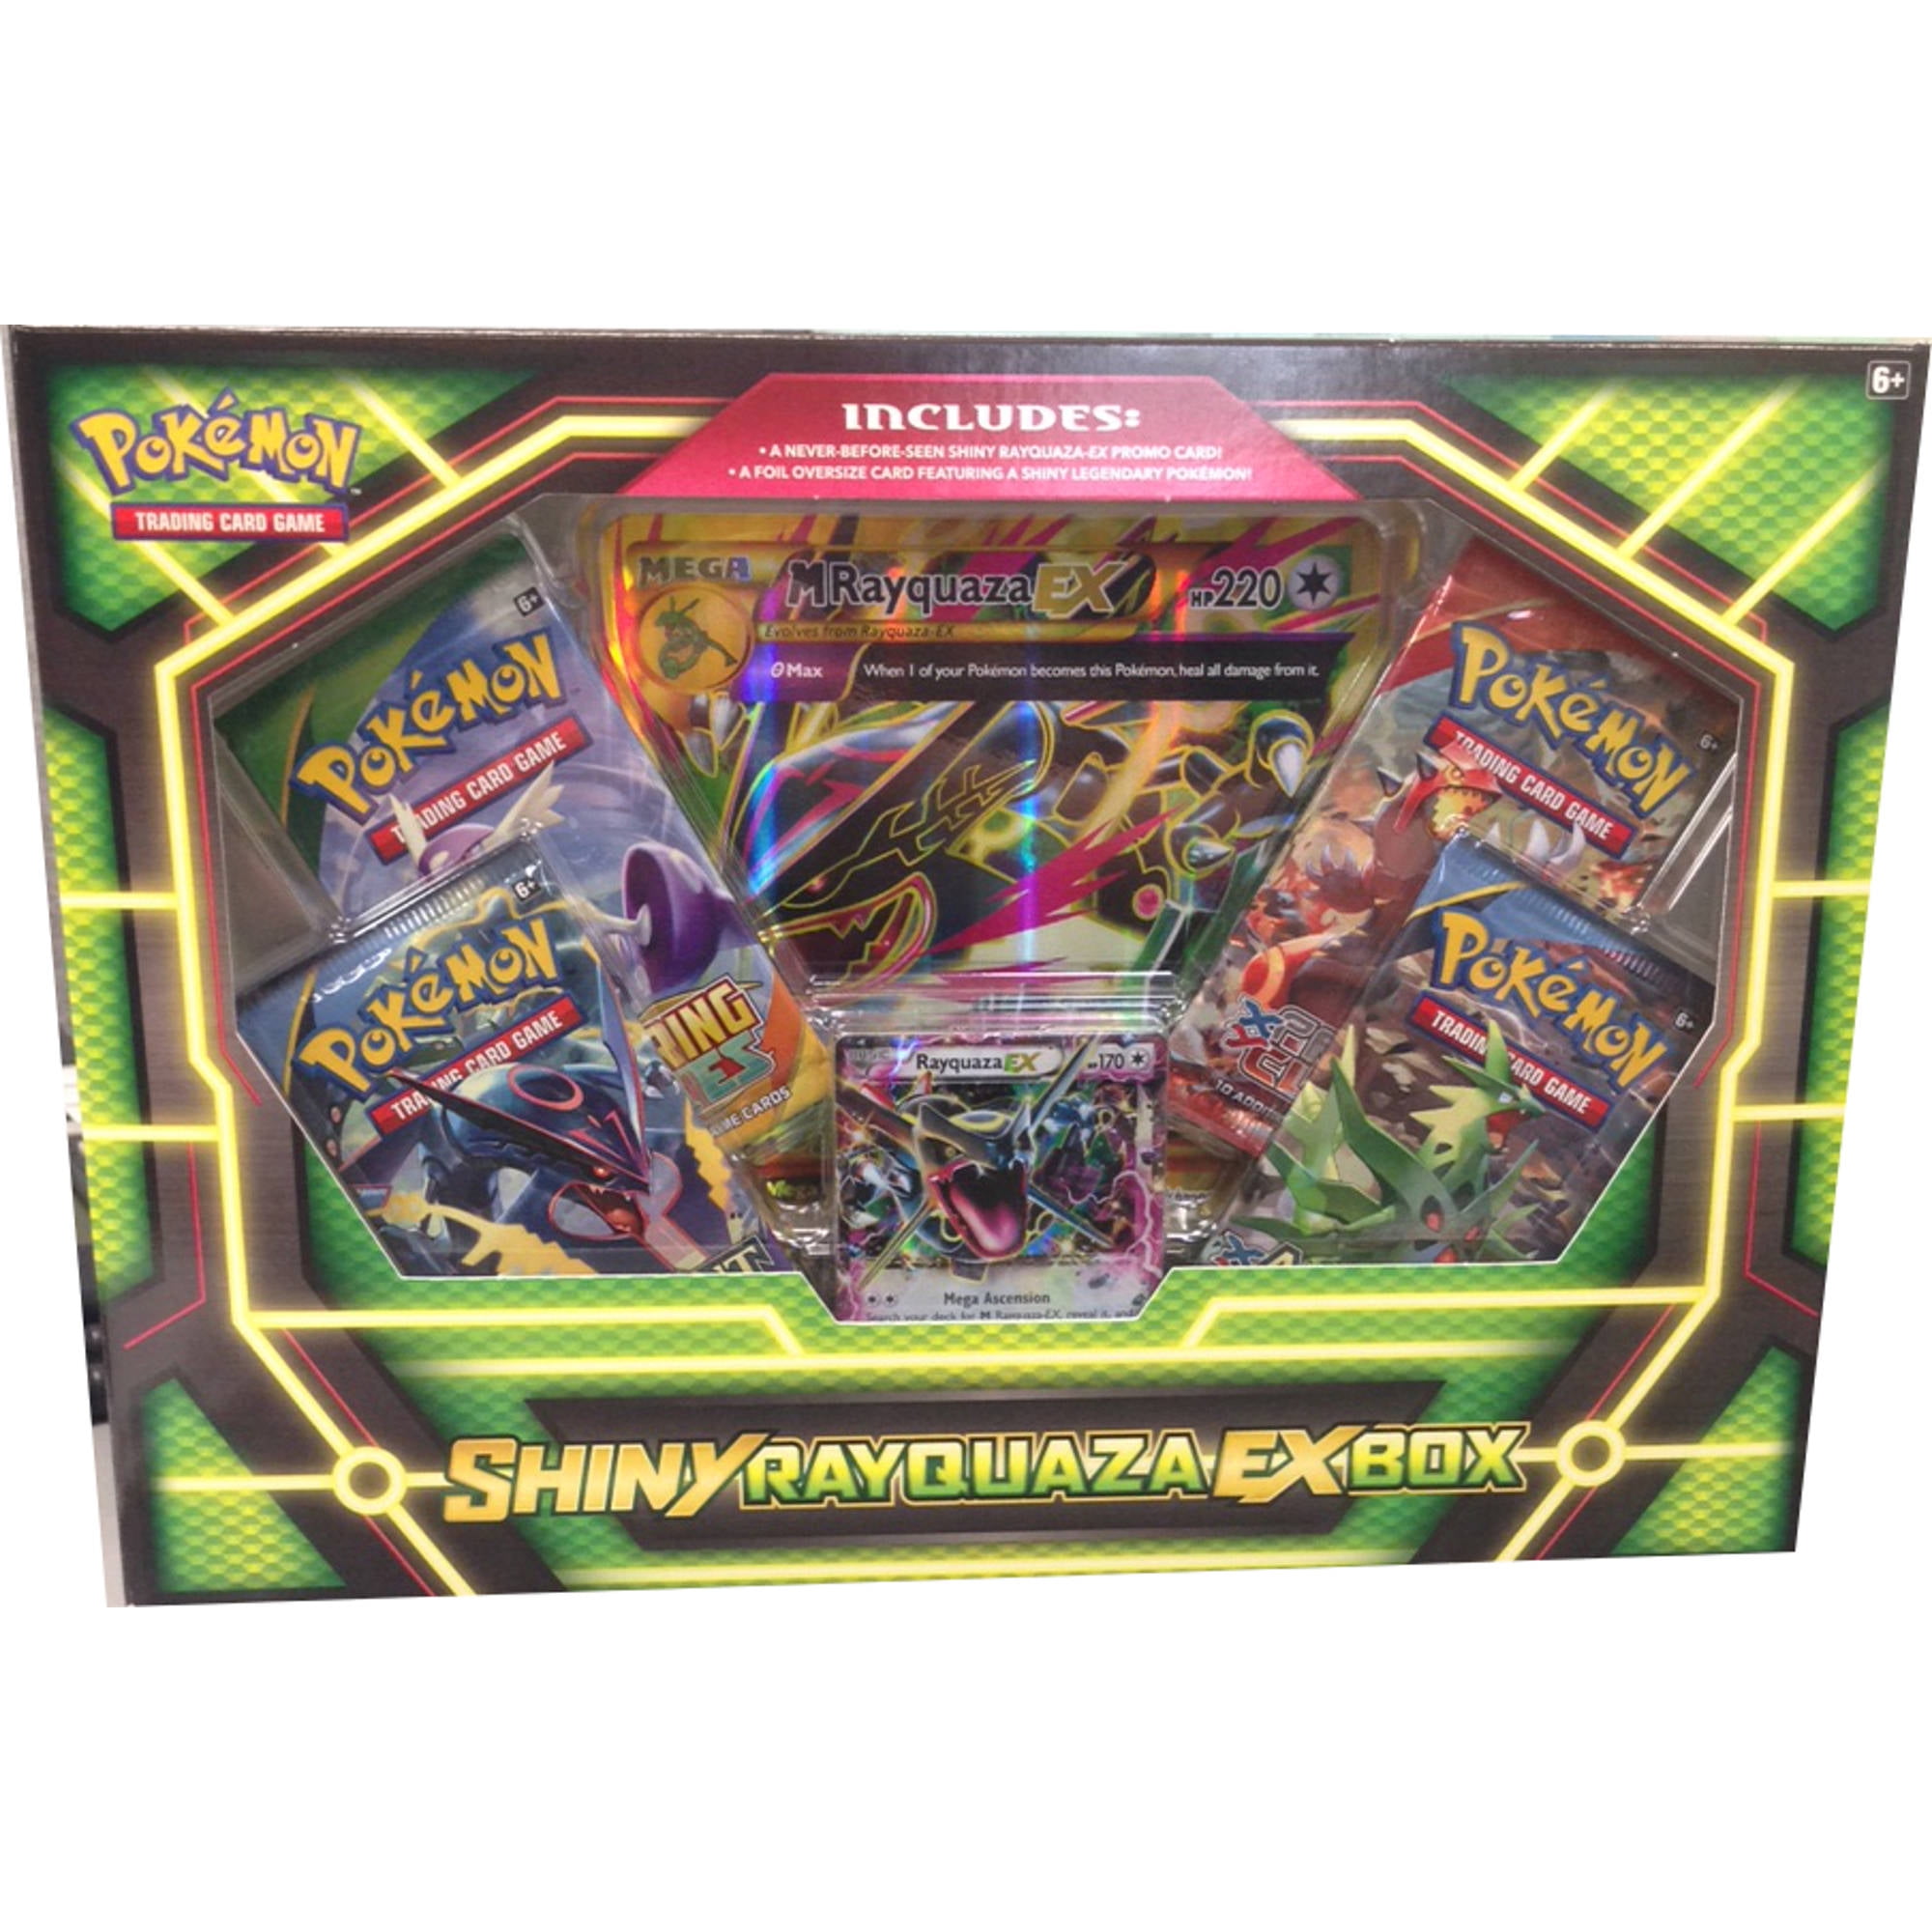 Pokemon Shiny Mega Rayquaza Card Sleeves-65ct [29176004] - $9.99 : Njoy  Games & Comics, The Premium Comic Book and Gaming Store in the San Fernando  Valley, Northridge Area